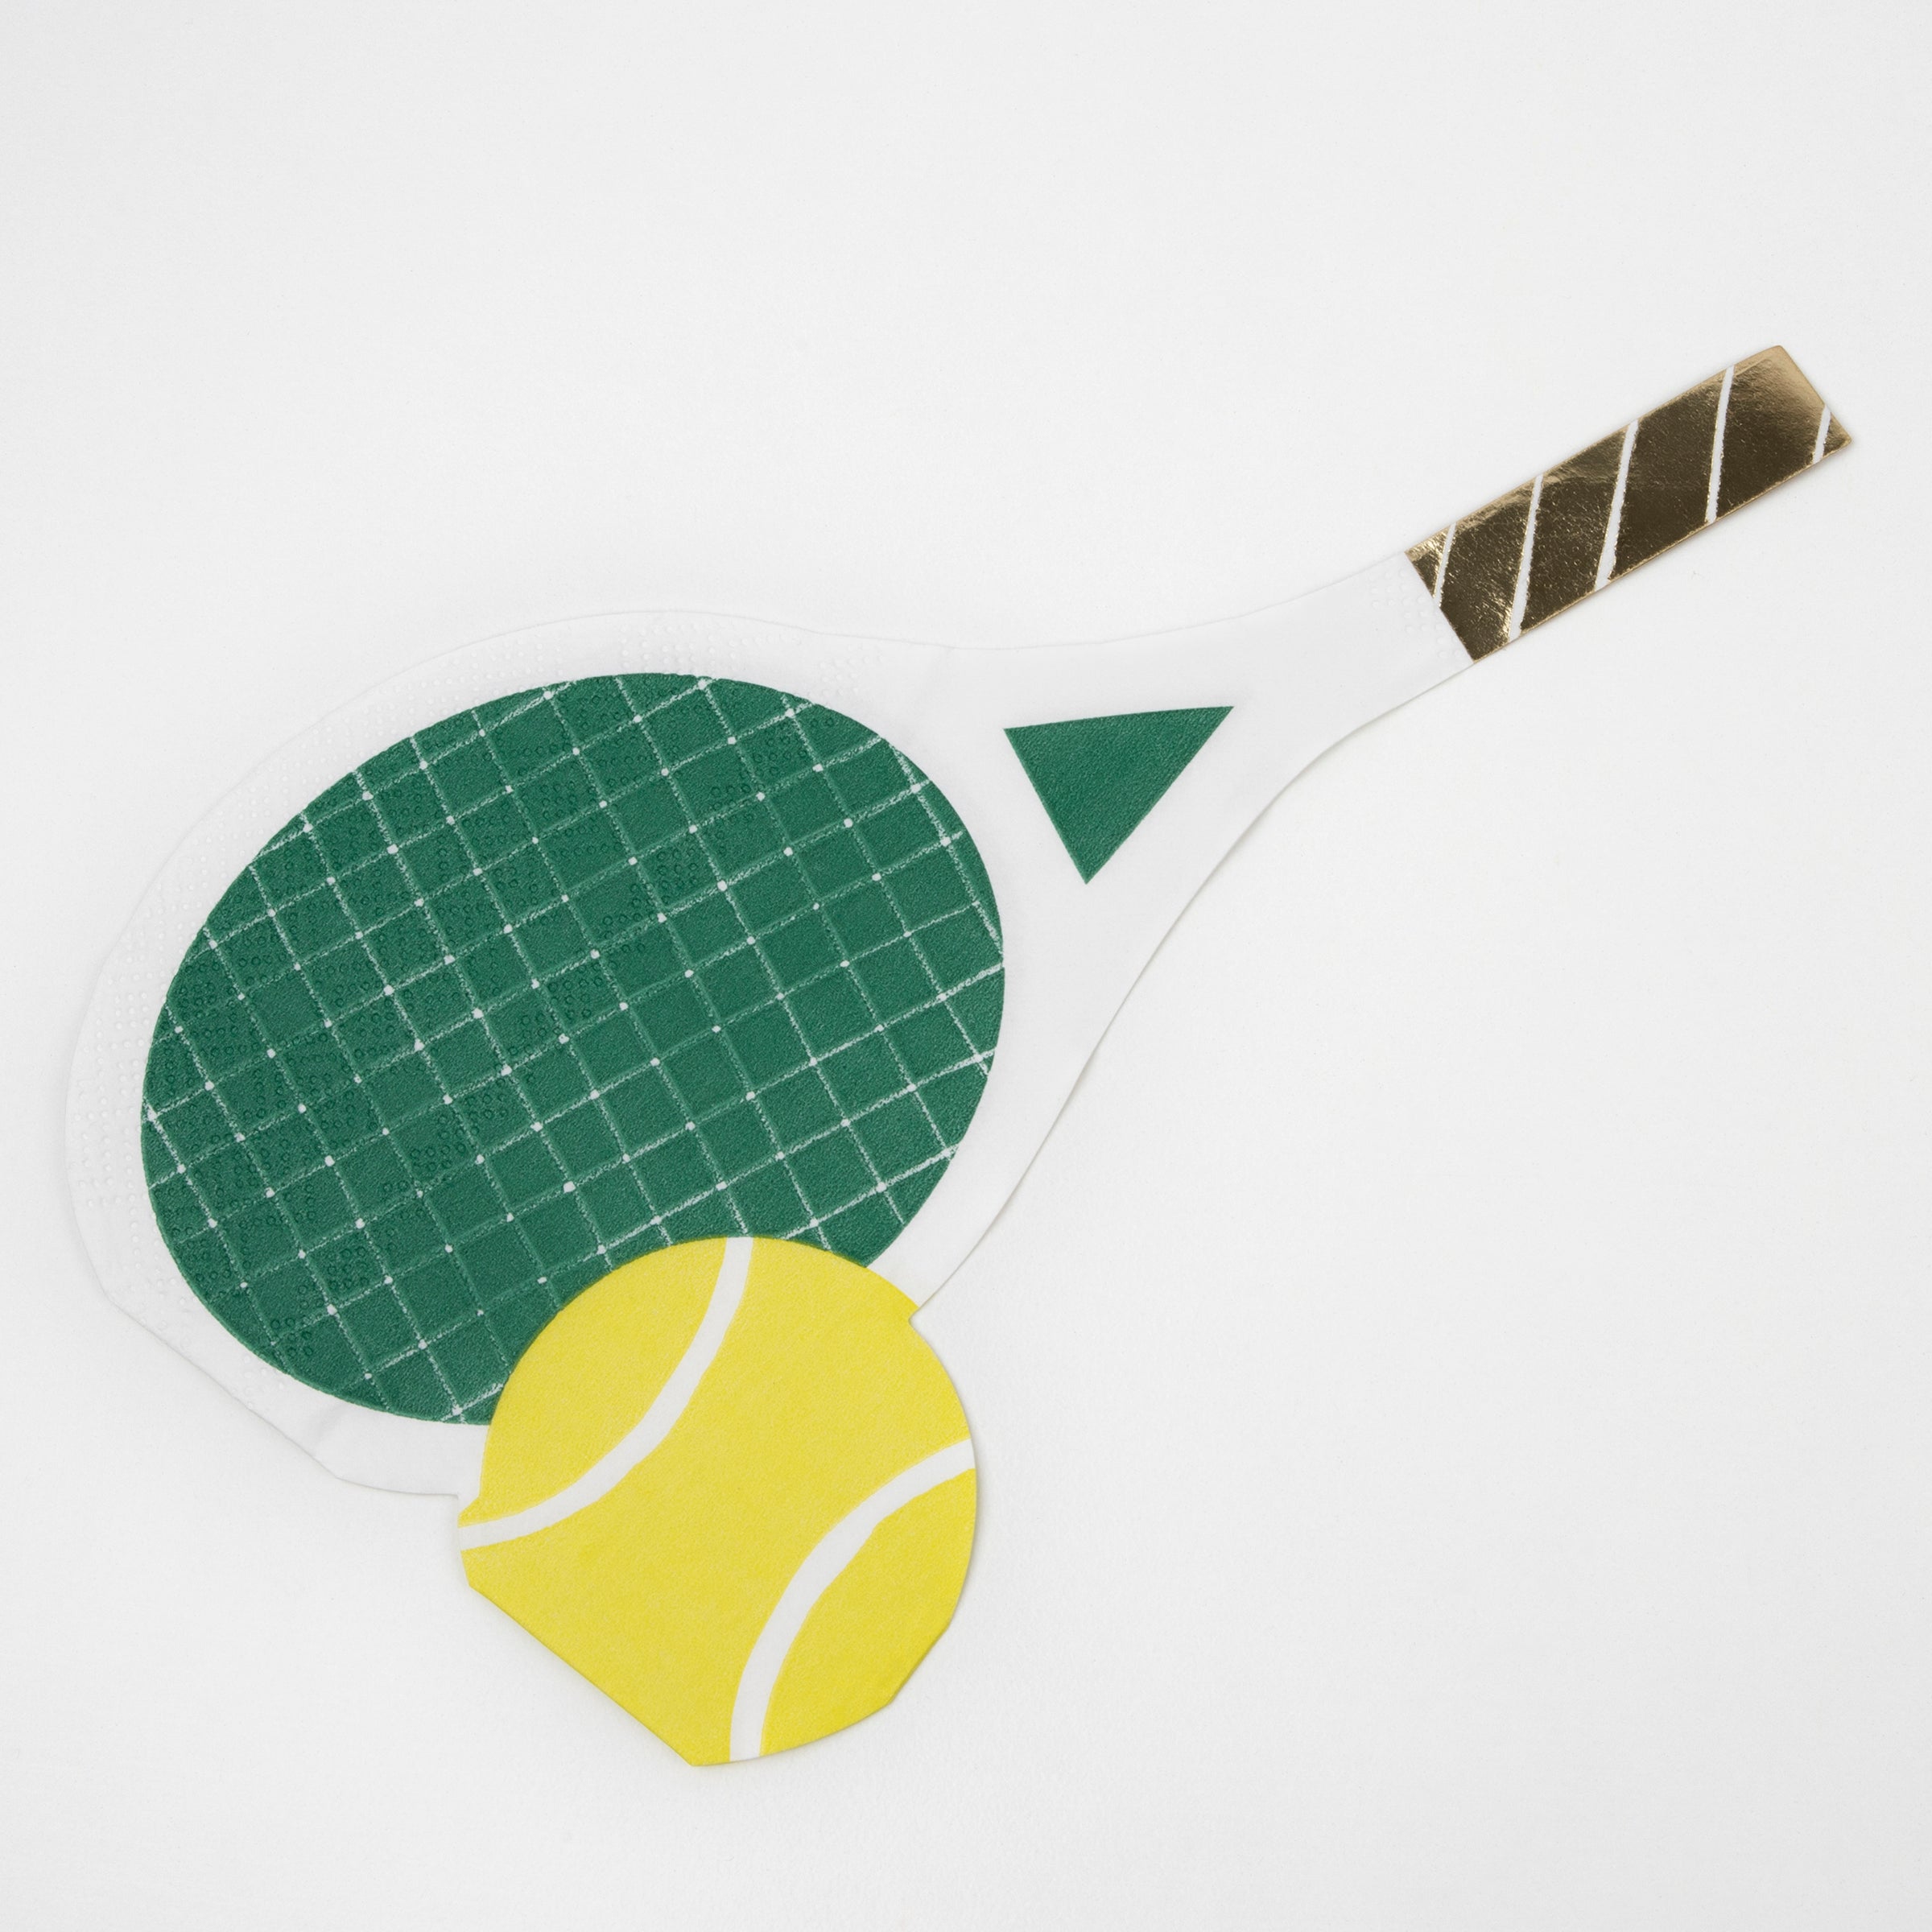 Our fun party napkins, in the shape of a tennis racket and tennis ball, are perfect for a tennis party.